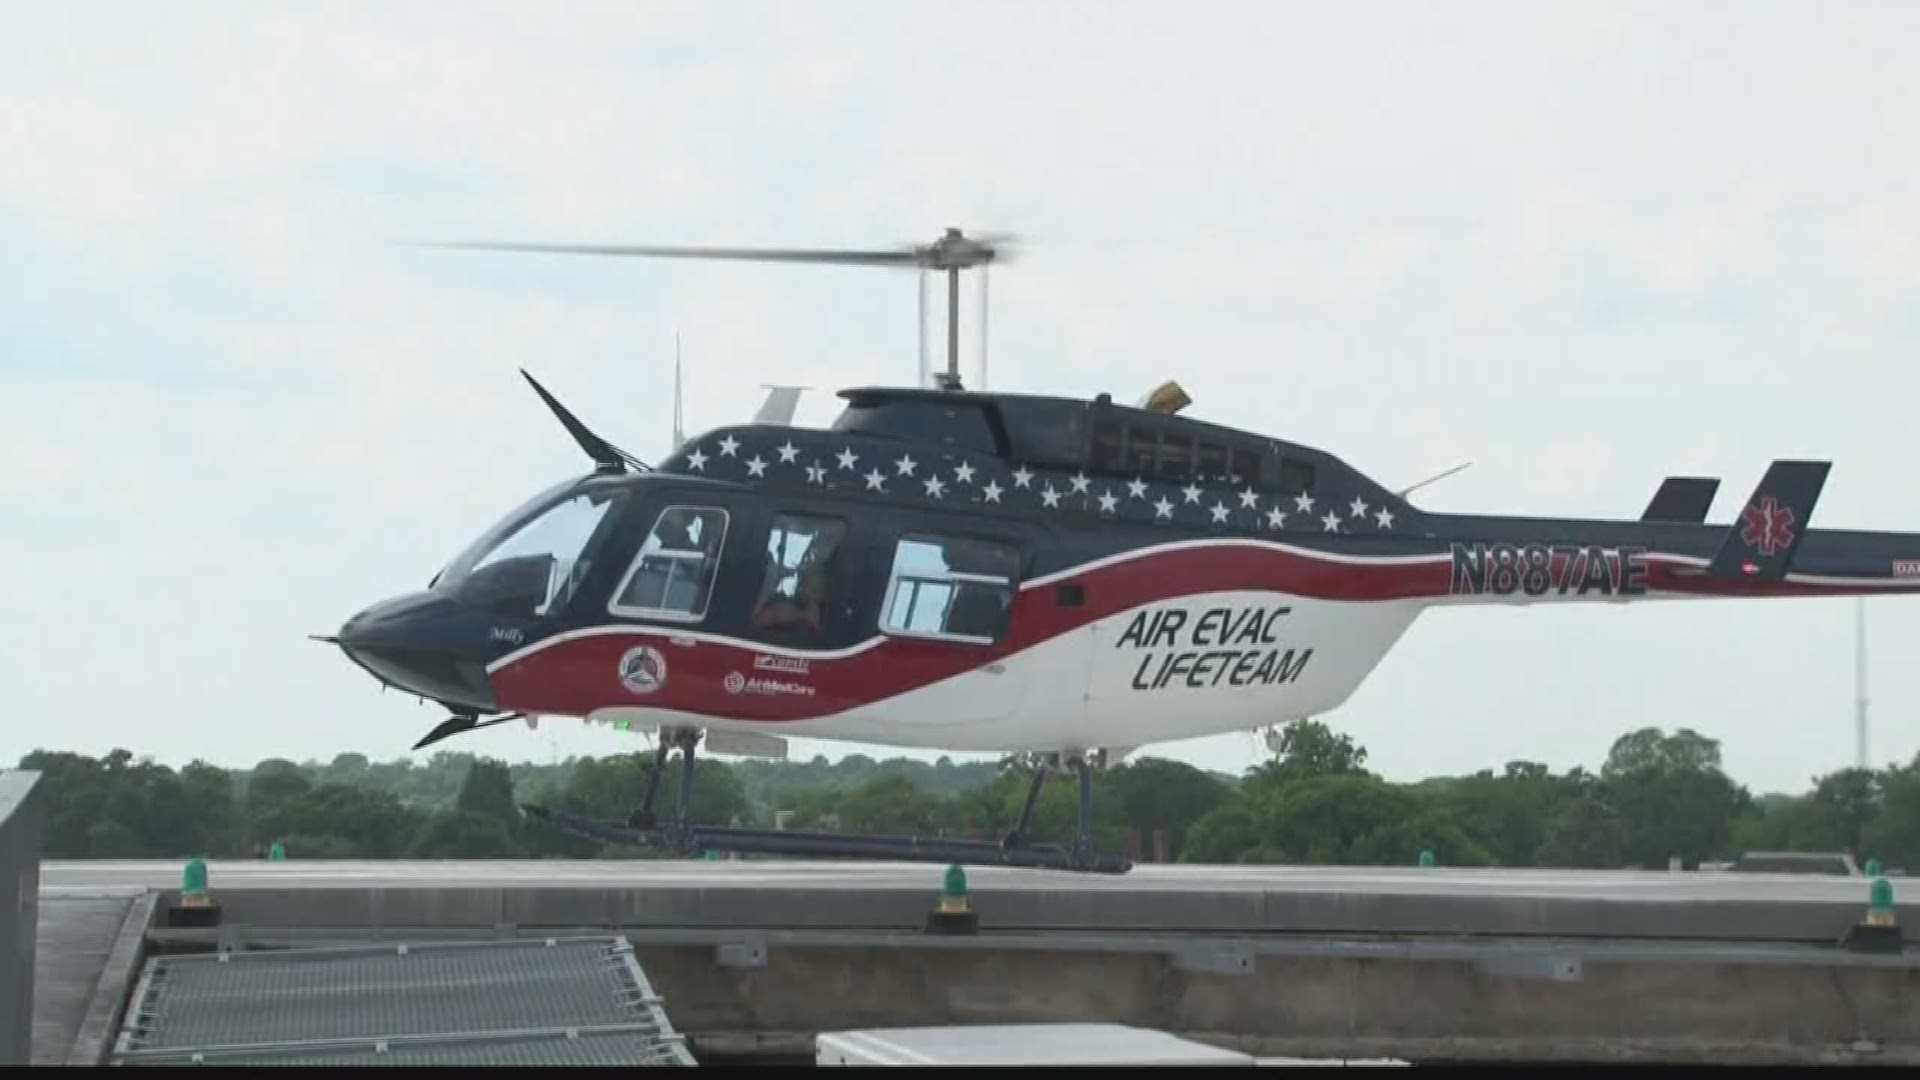 The Medical Center, Navicent Health say they depend on helicopter teams to get trauma victims to the emergency room quickly.